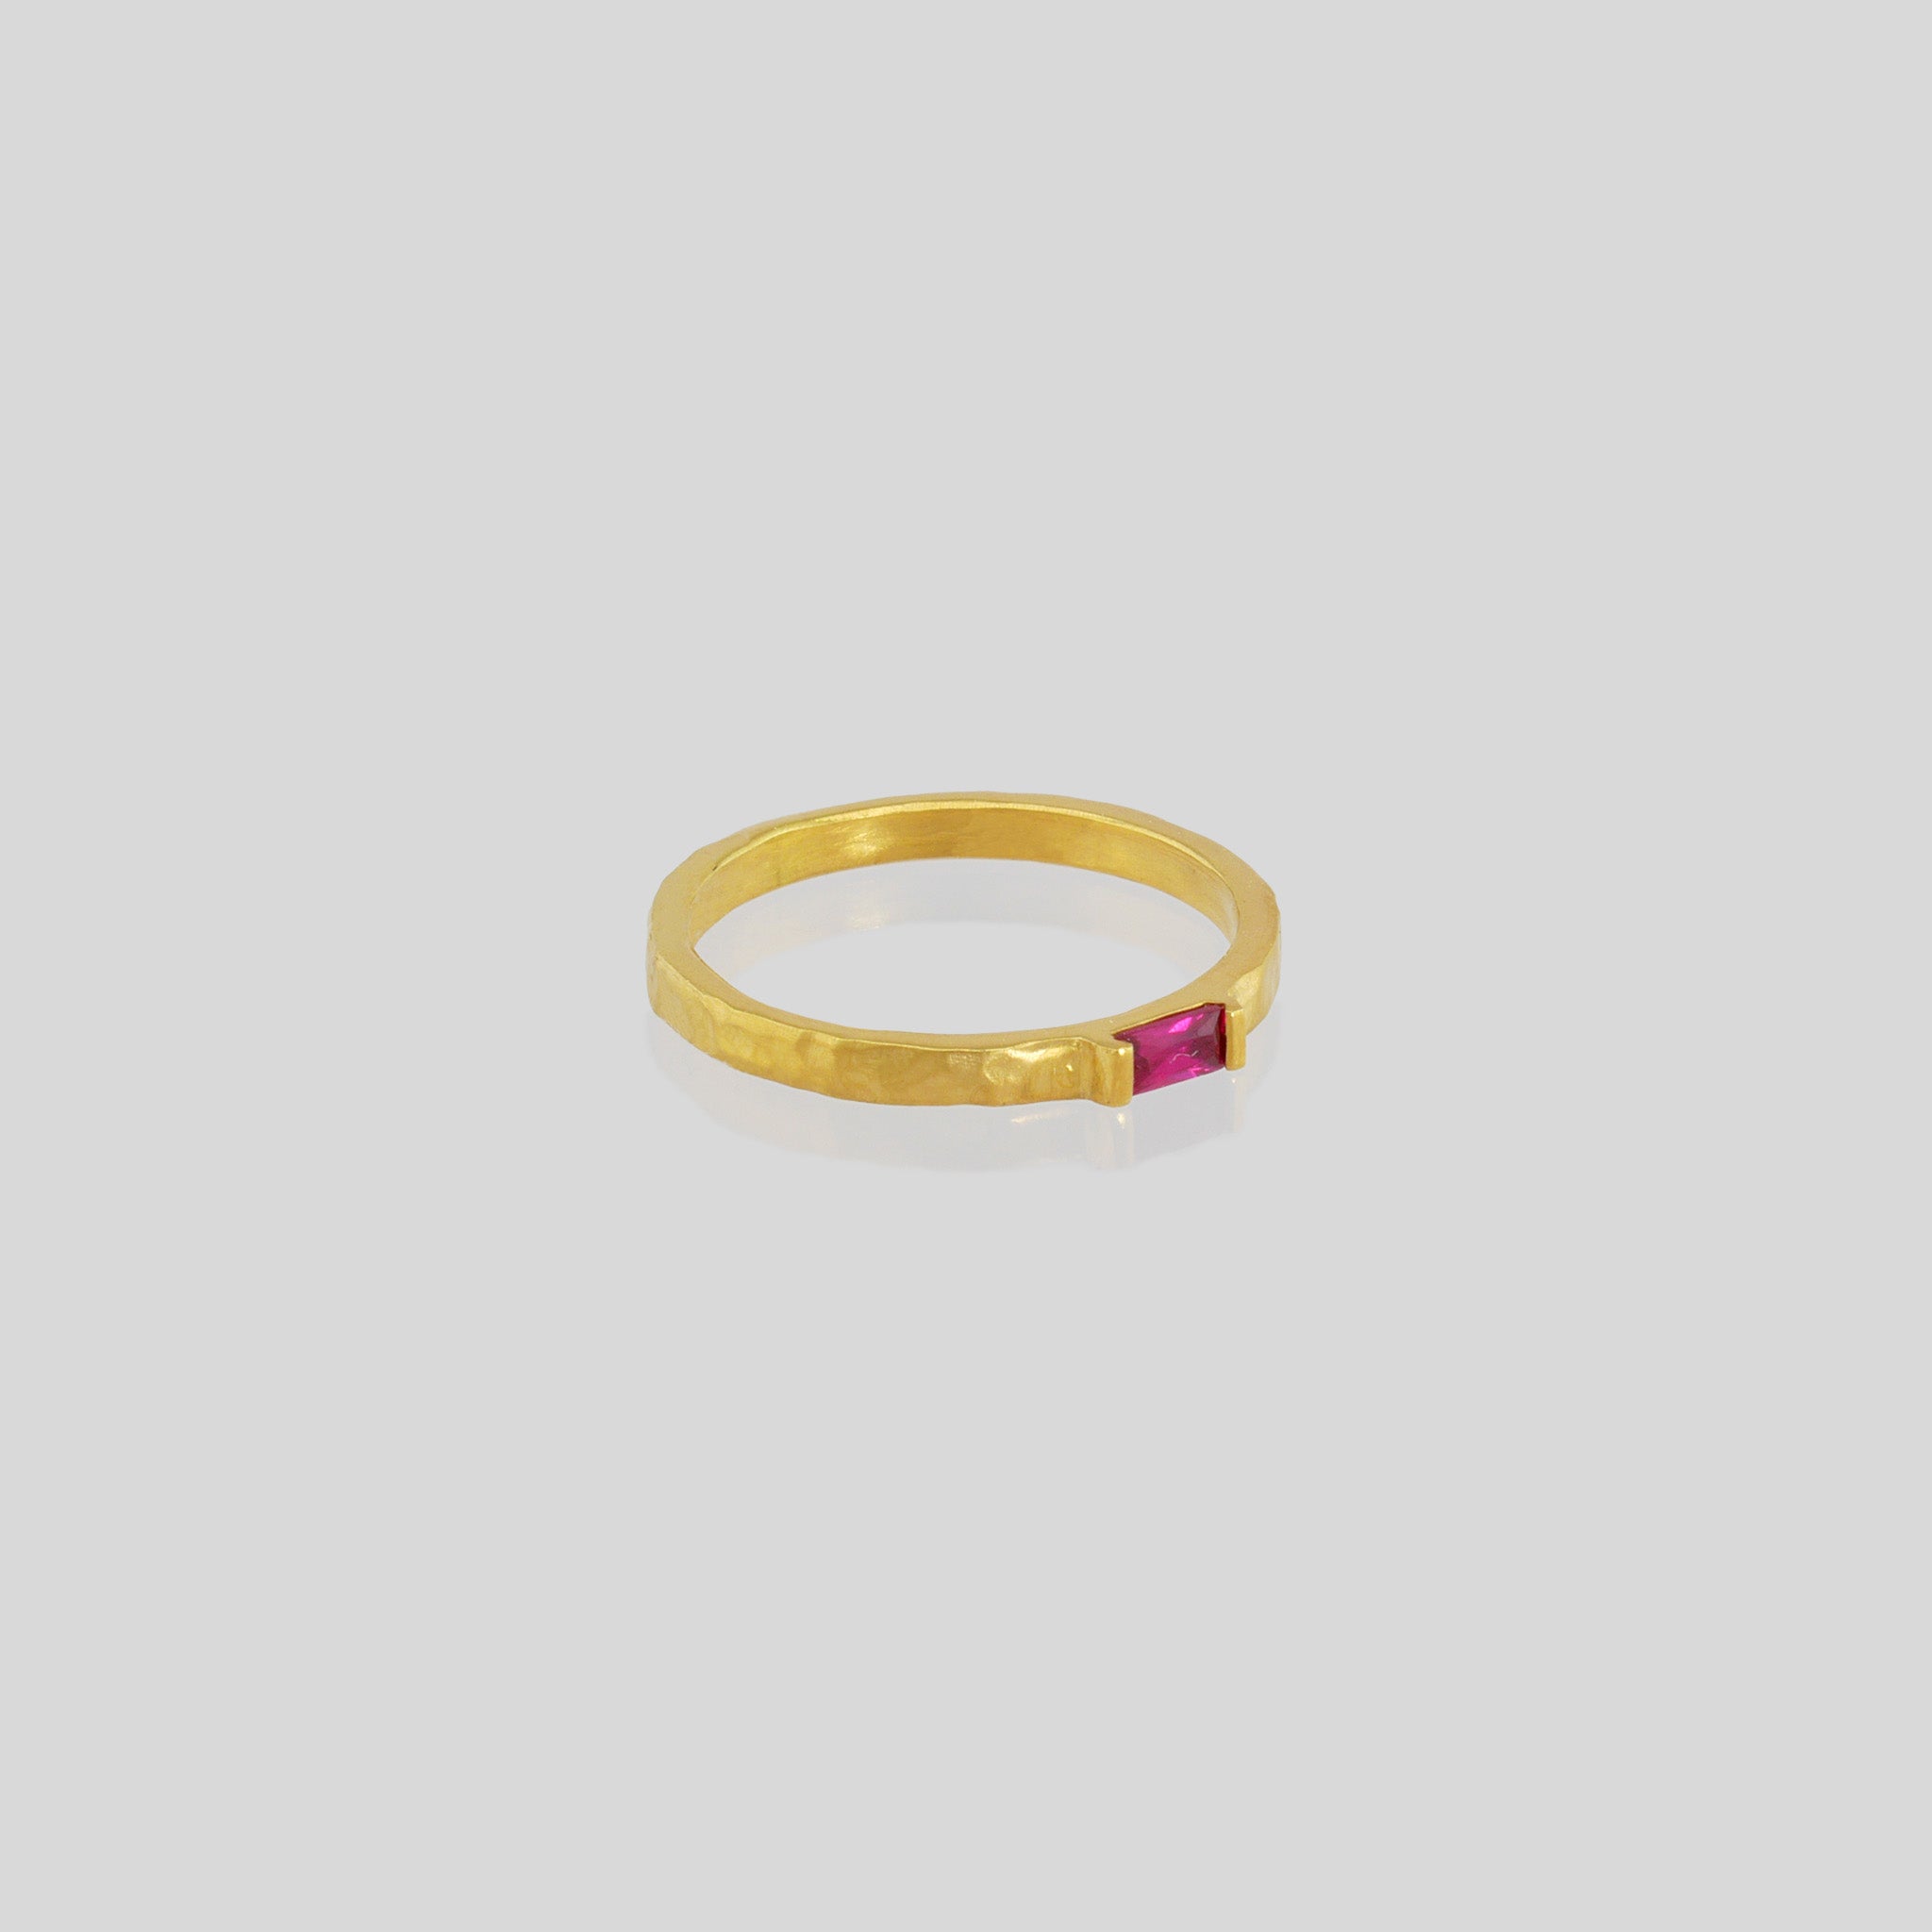 Handmade gold ring with hand-hammered surface and baguette Ruby accent. Timeless elegance in Yellow gold, a perfect addition to any ensemble.